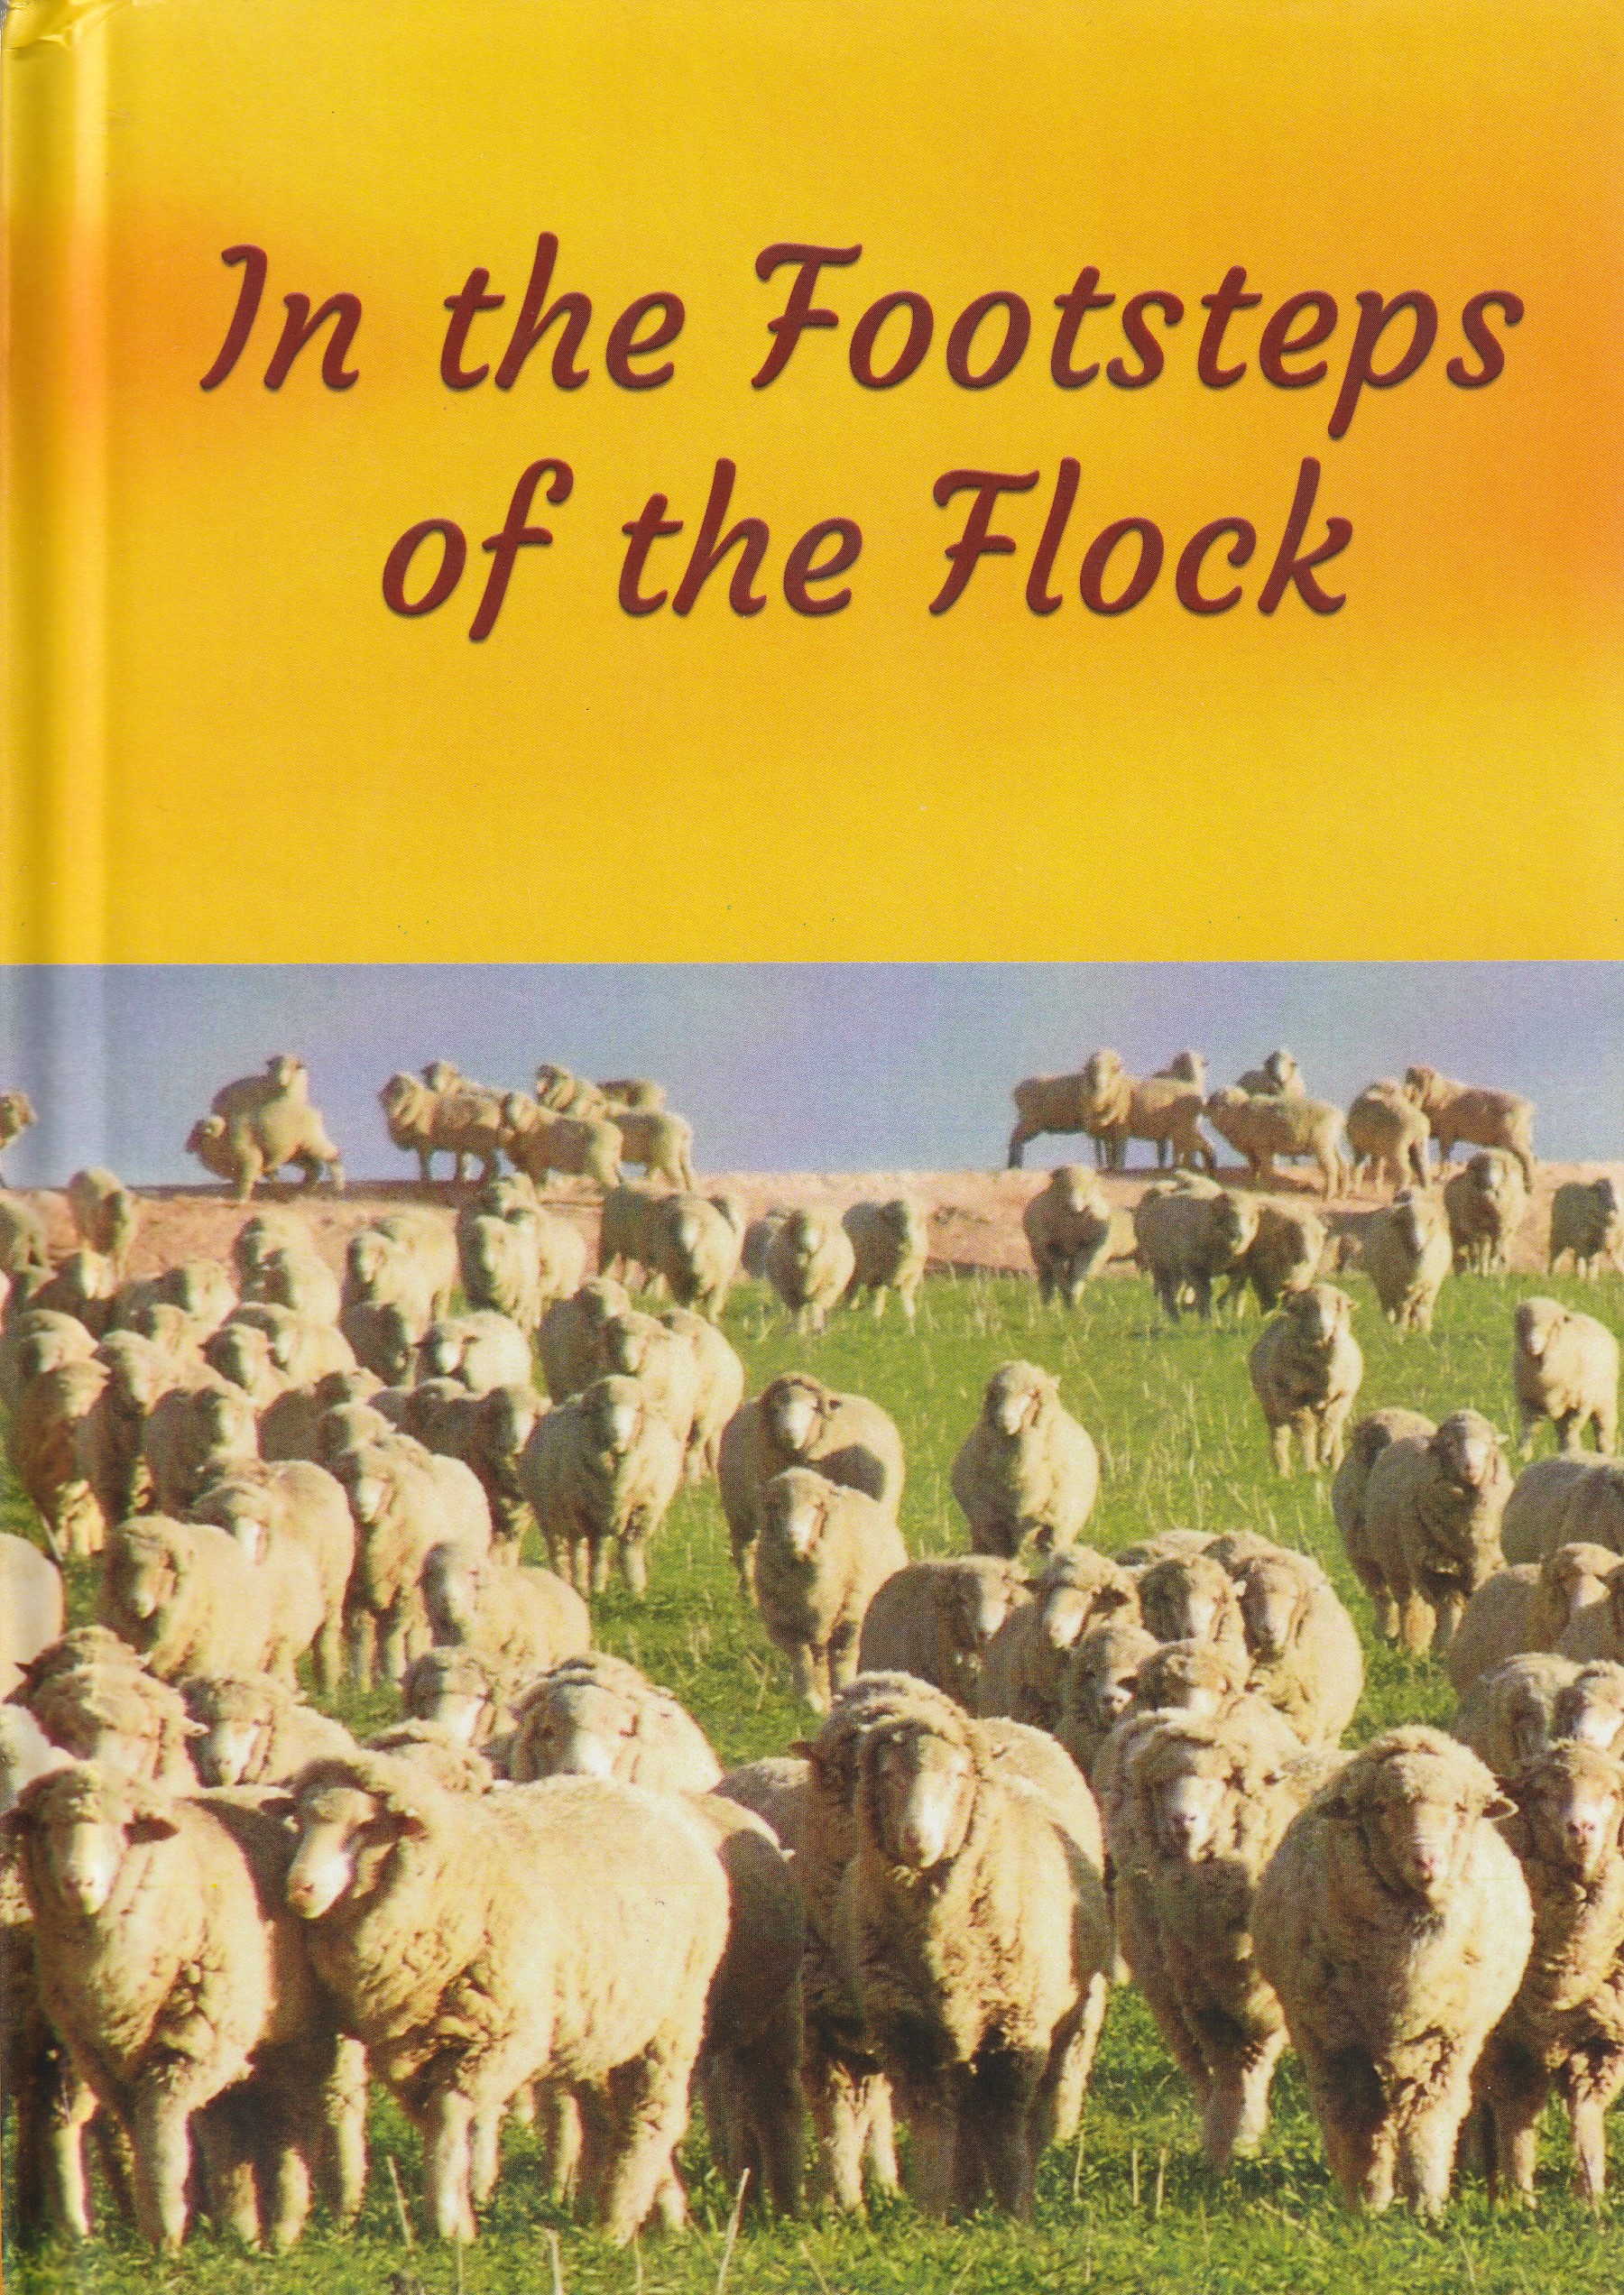 Westminster Standard Publications Vol. 4: In the Footsteps of the Flock